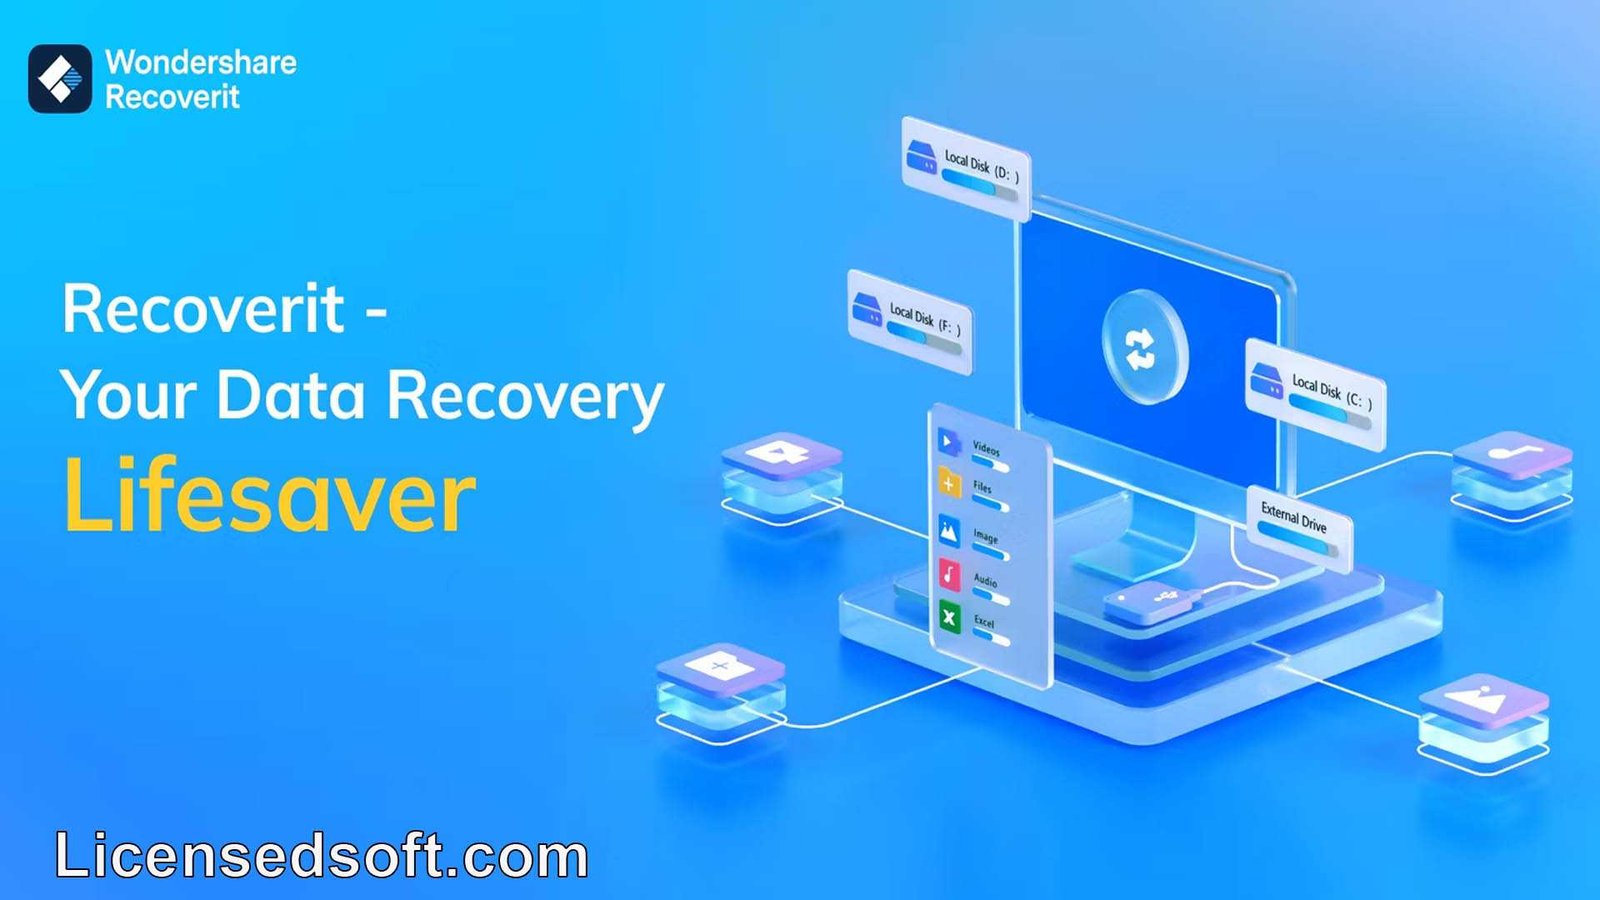 Wondershare Recoverit 12.5.4.1 For macOS Lifetime Premium cover photo by licensedsoft